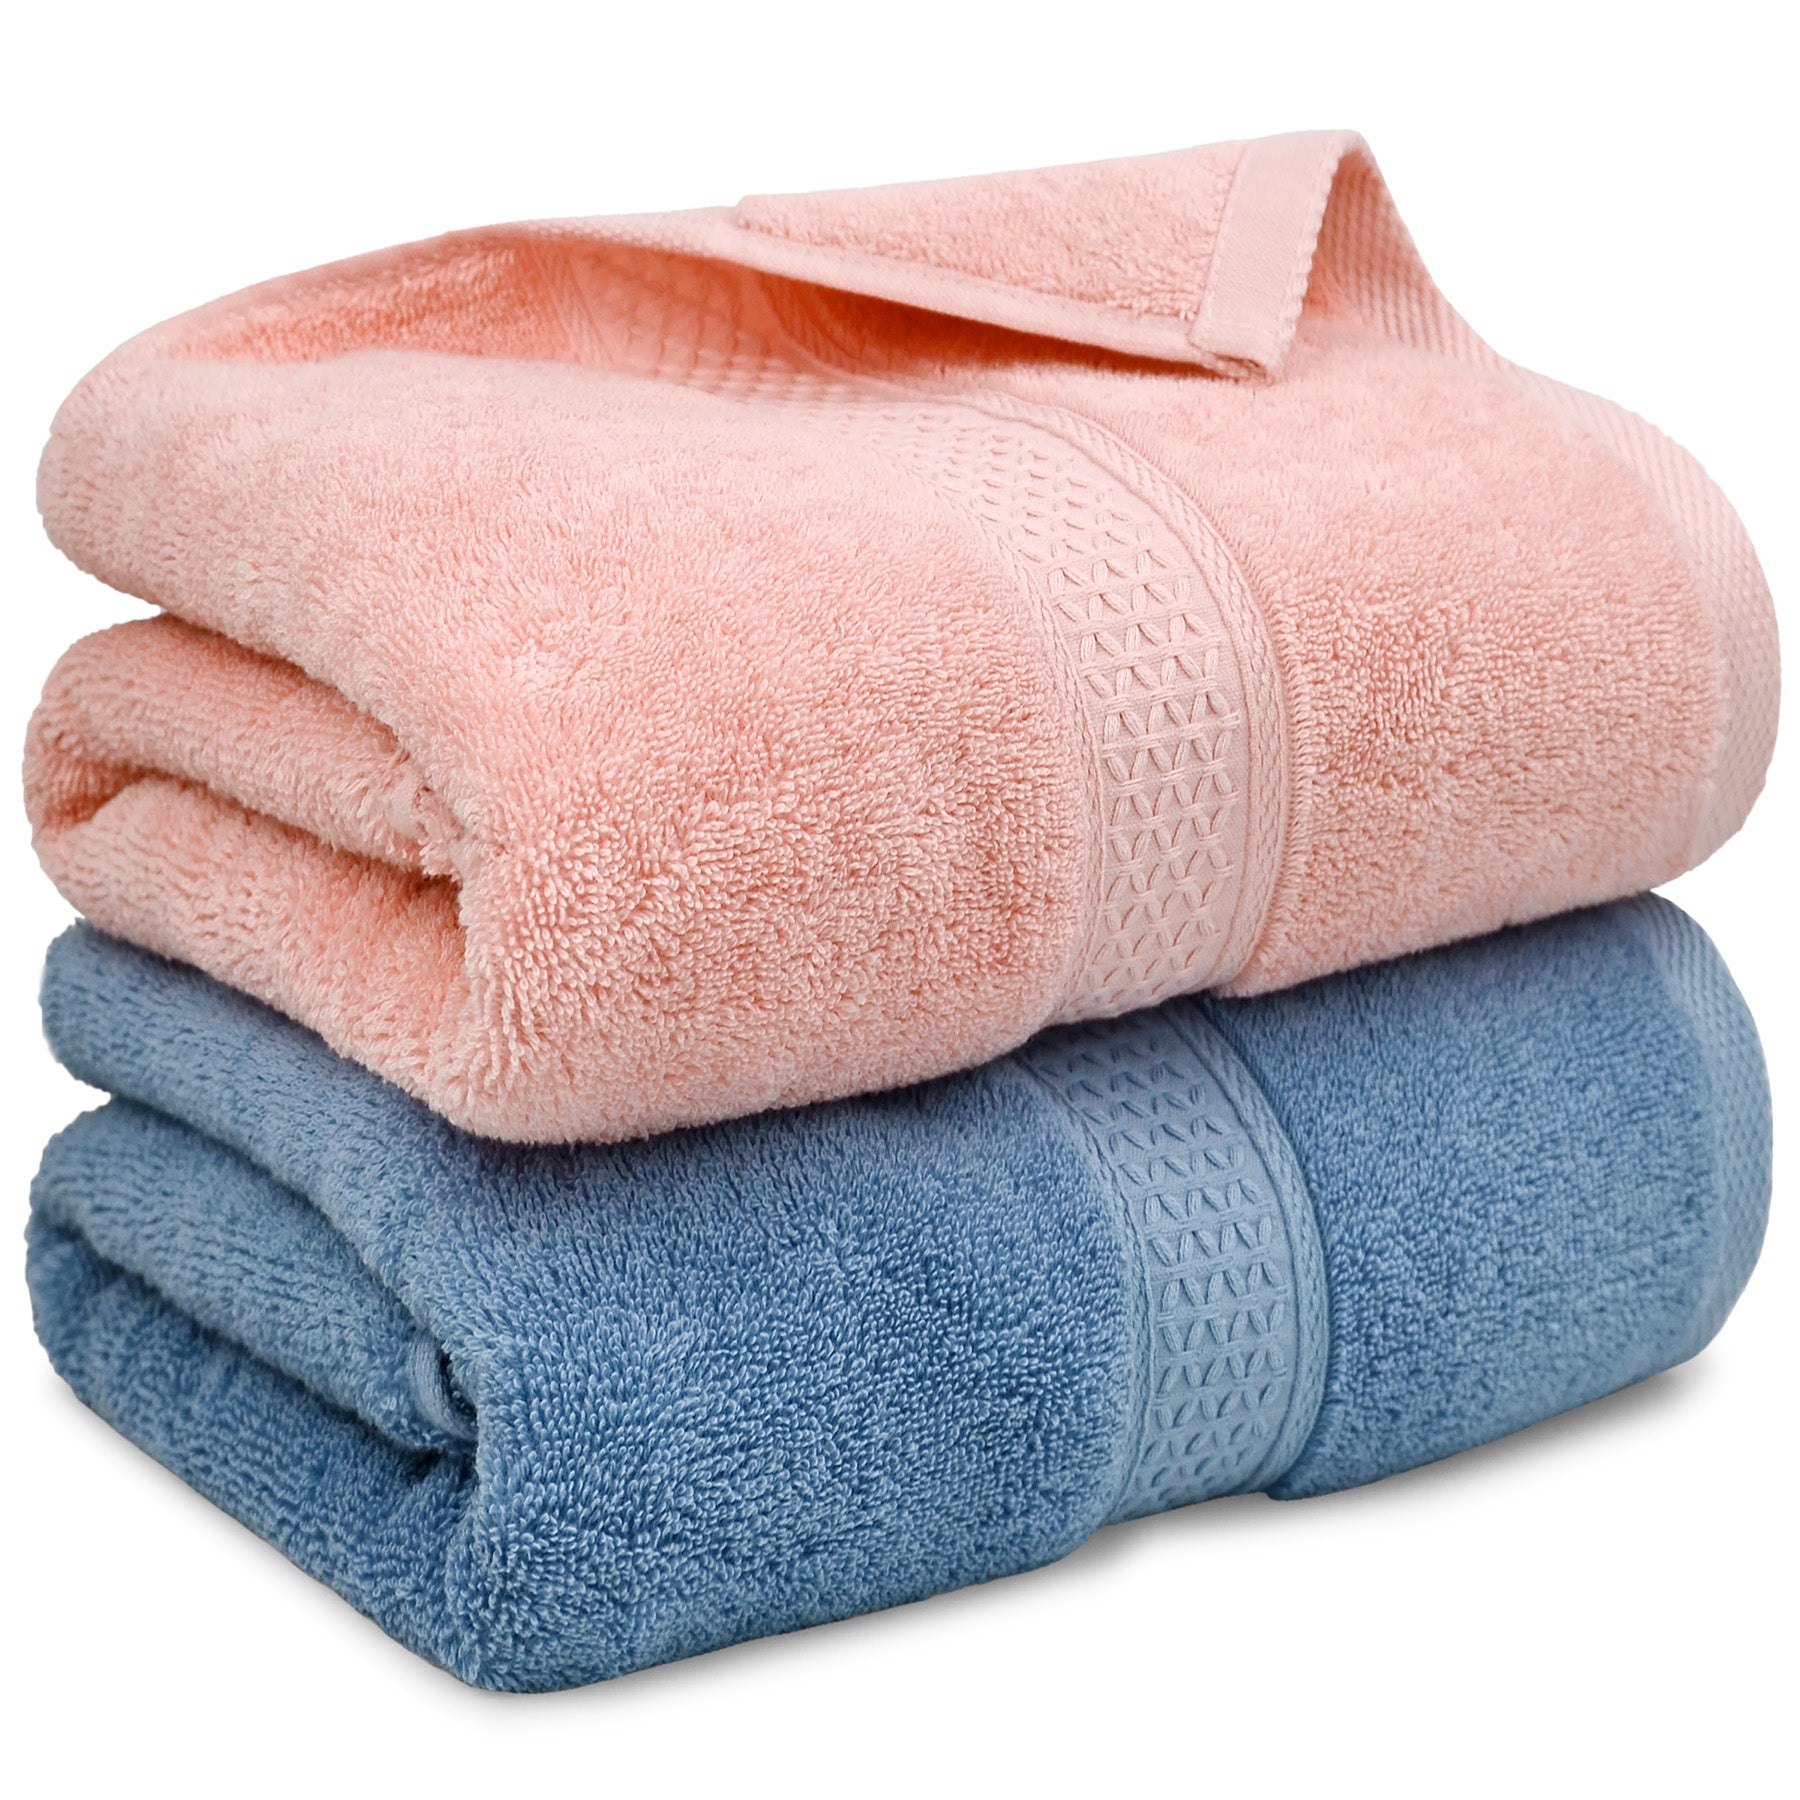 Cleanbear Soft Hand Towels Bathroom Hand Towel Set, 100% Cotton Lightweight  for Quick Dry 2 Pack, 13 x 29 Inches (Peach Pink)